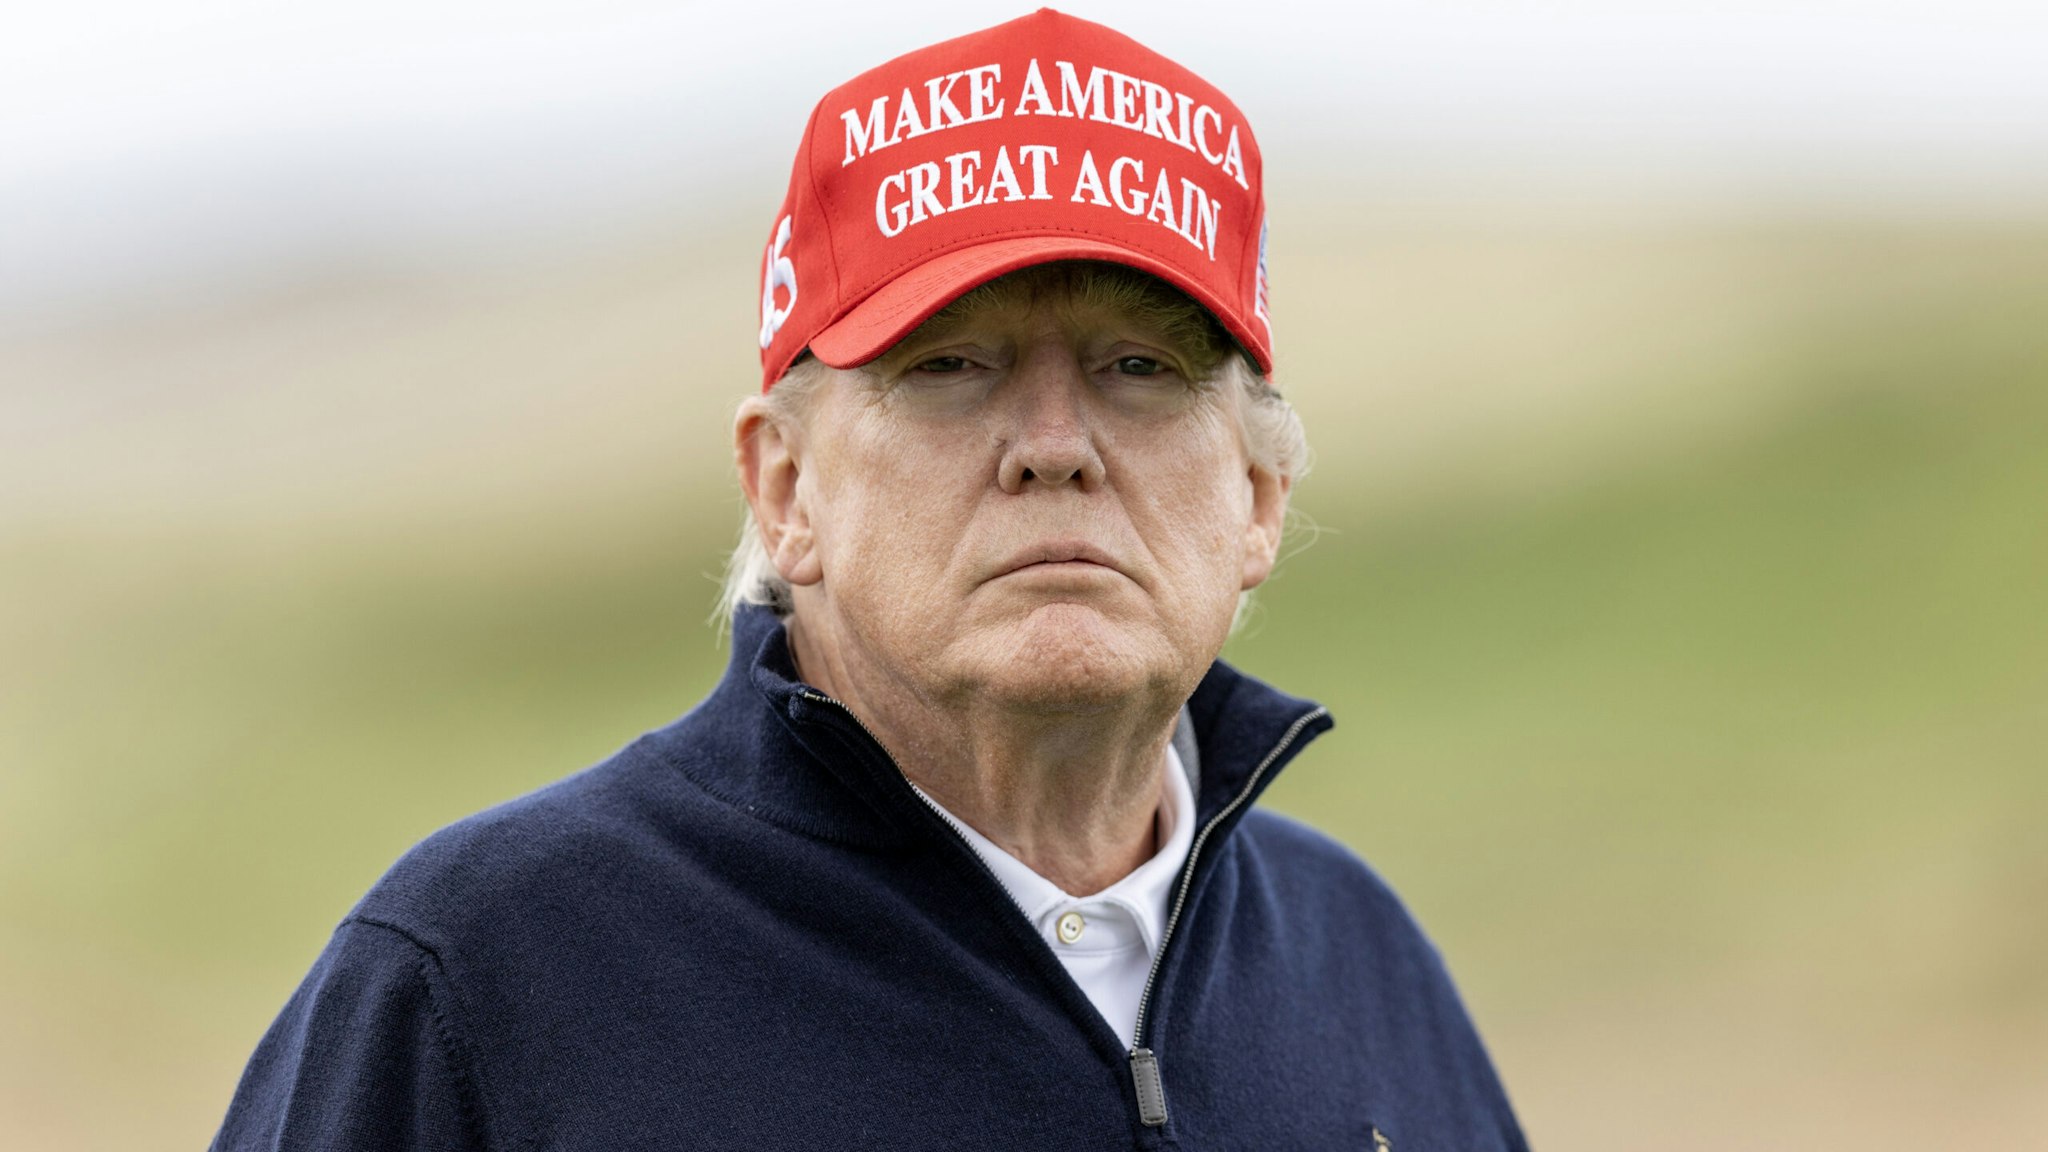 TURNBERRY, SCOTLAND - MAY 02: Former U.S. President Donald Trump during a round of golf at his Turnberry course on May 2, 2023 in Turnberry, Scotland. Former U.S. President Donald Trump is visiting his golf courses in Scotland and Ireland. Back in the United States, he faces legal action on 34 counts of falsifying business records.